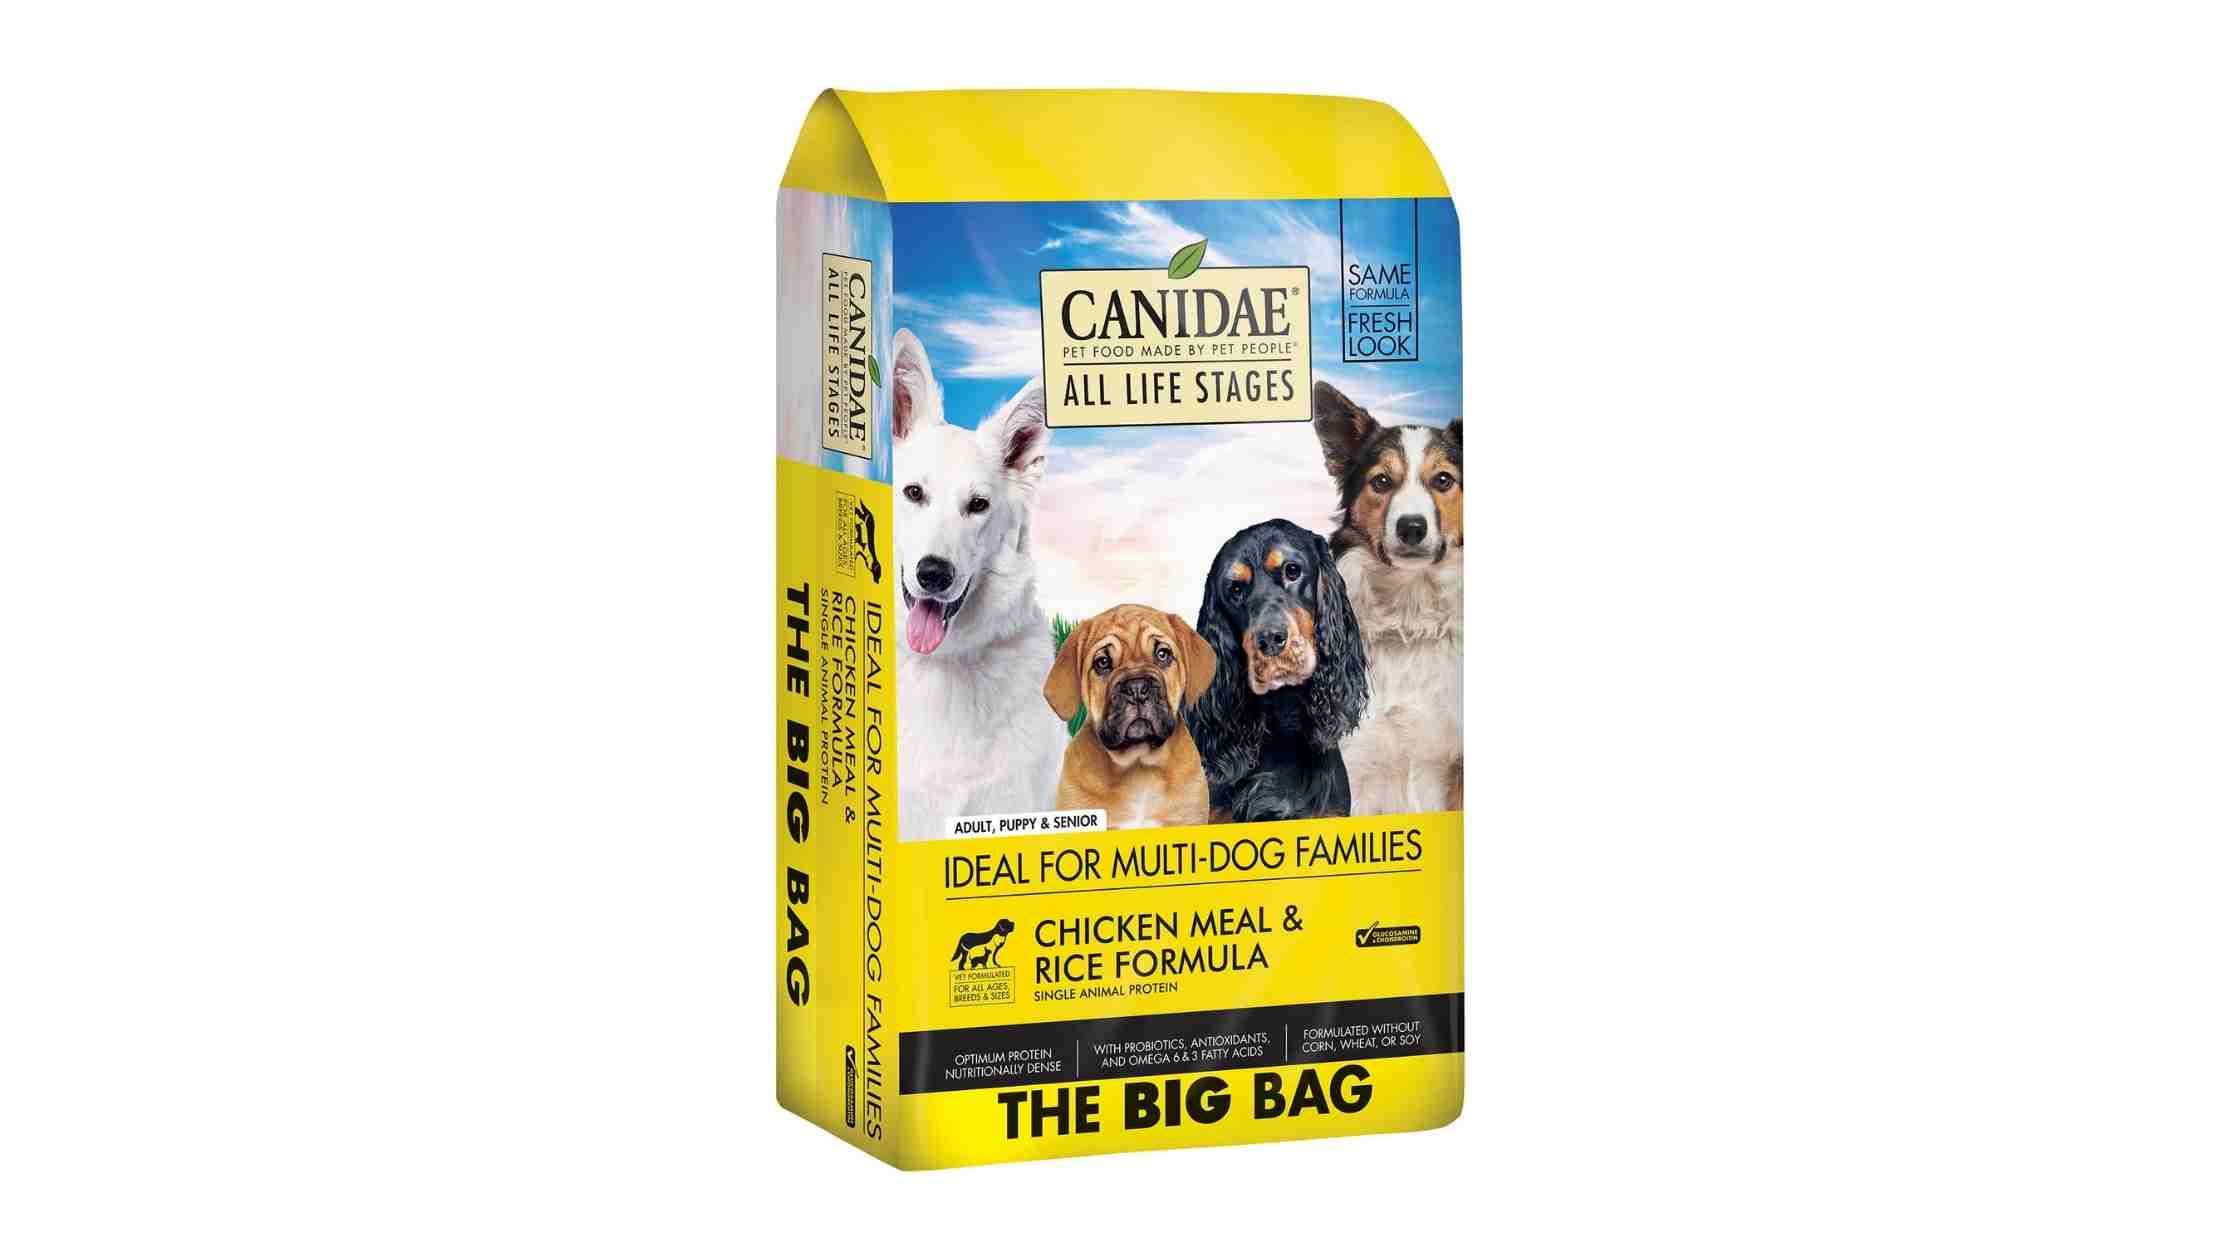 Canidae Dog Food Recall (2022) - Is it Safe Ever?